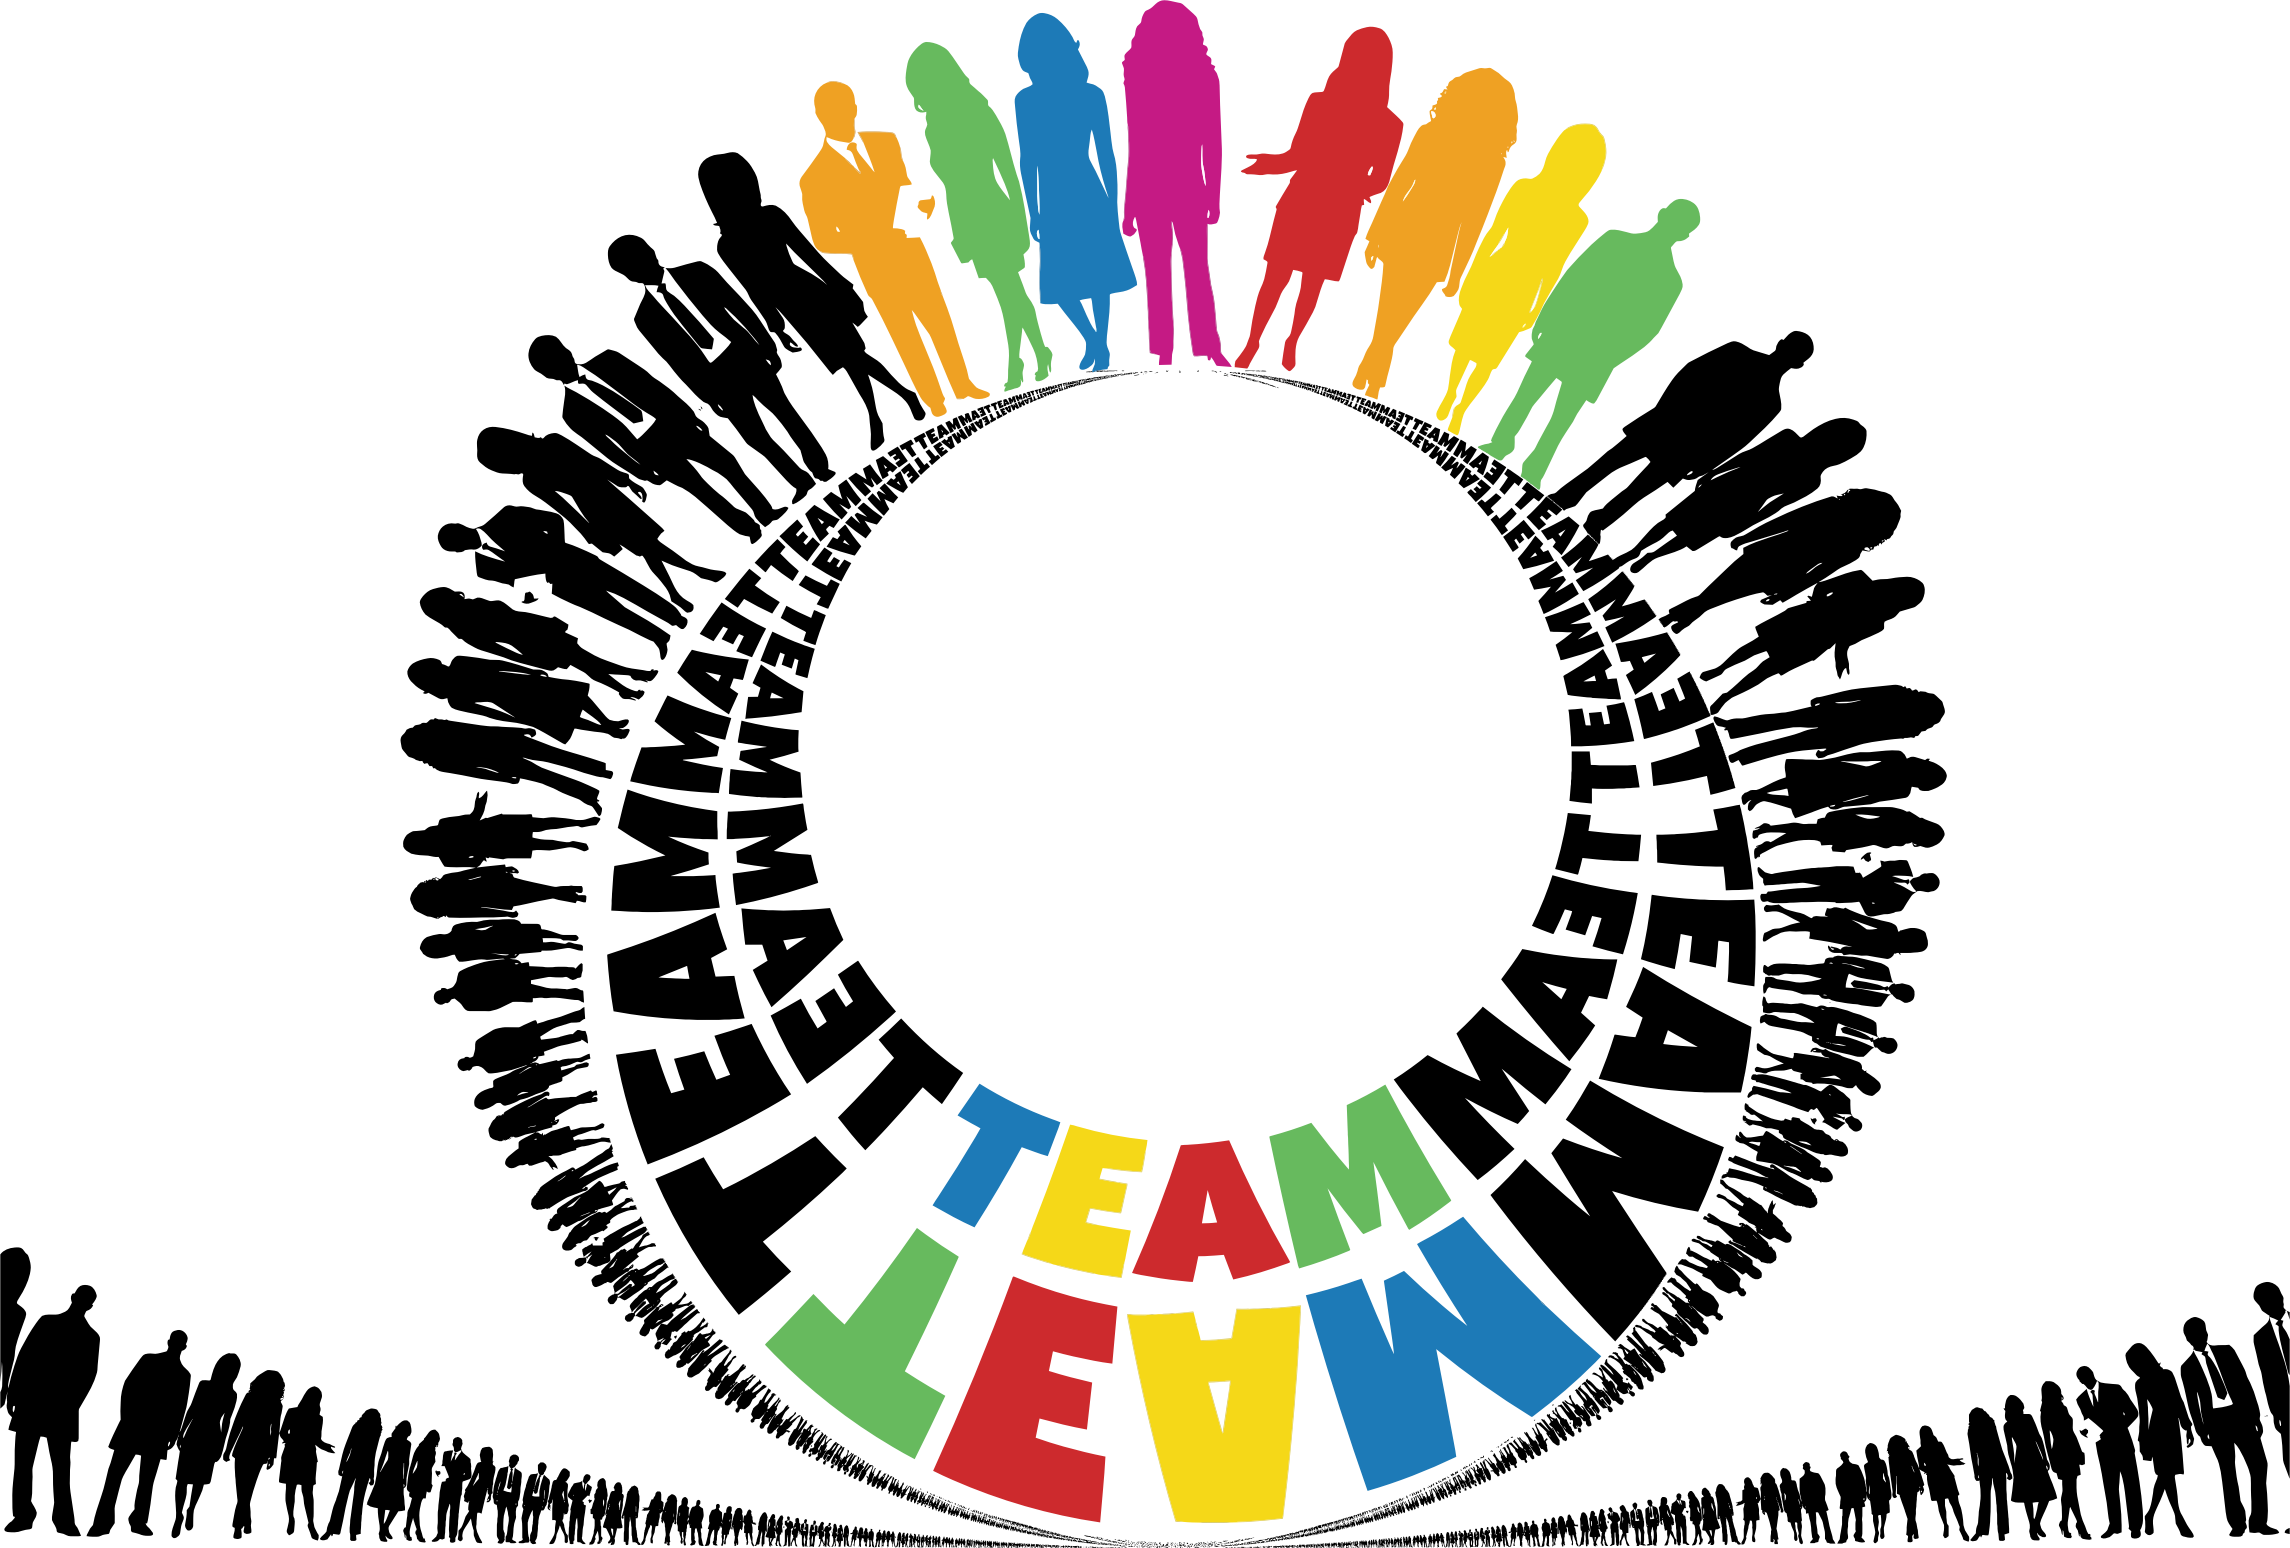 Working clipart team, Working team Transparent FREE for.